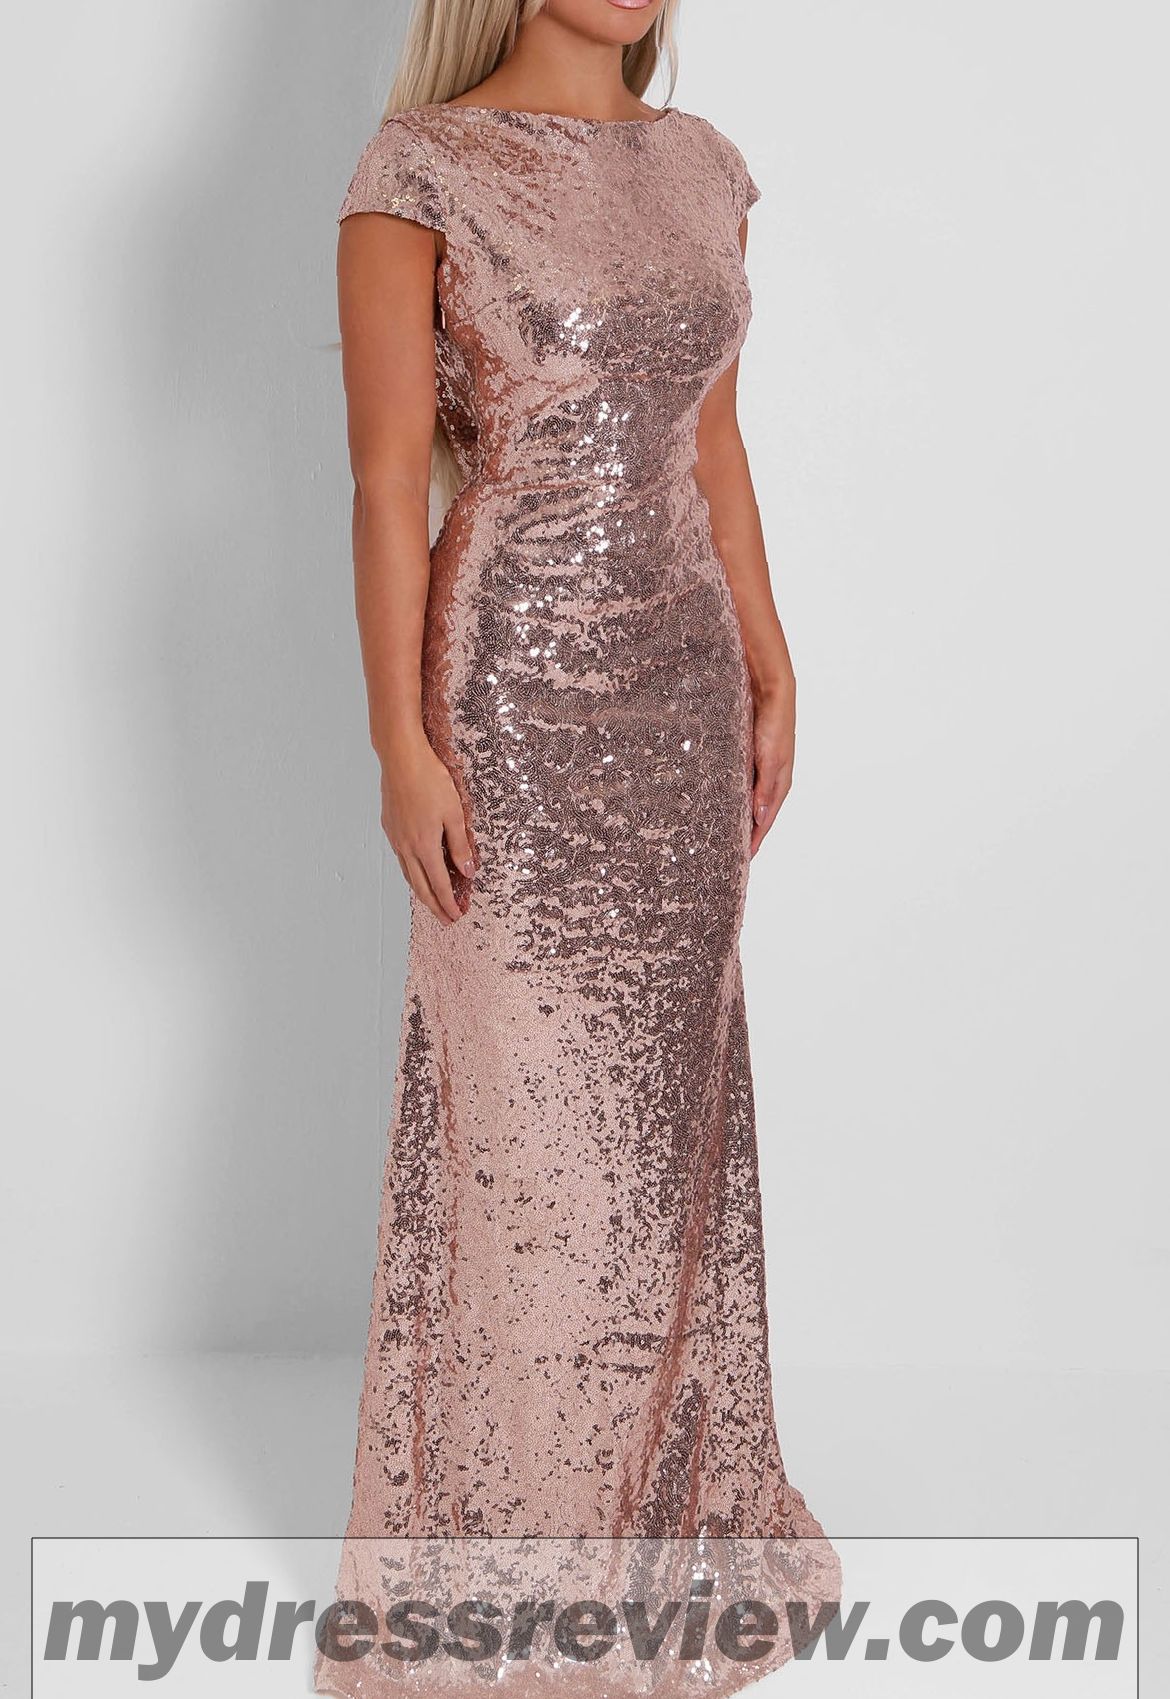 Maxi Gold Sequin Dress & Clothing Brand Reviews